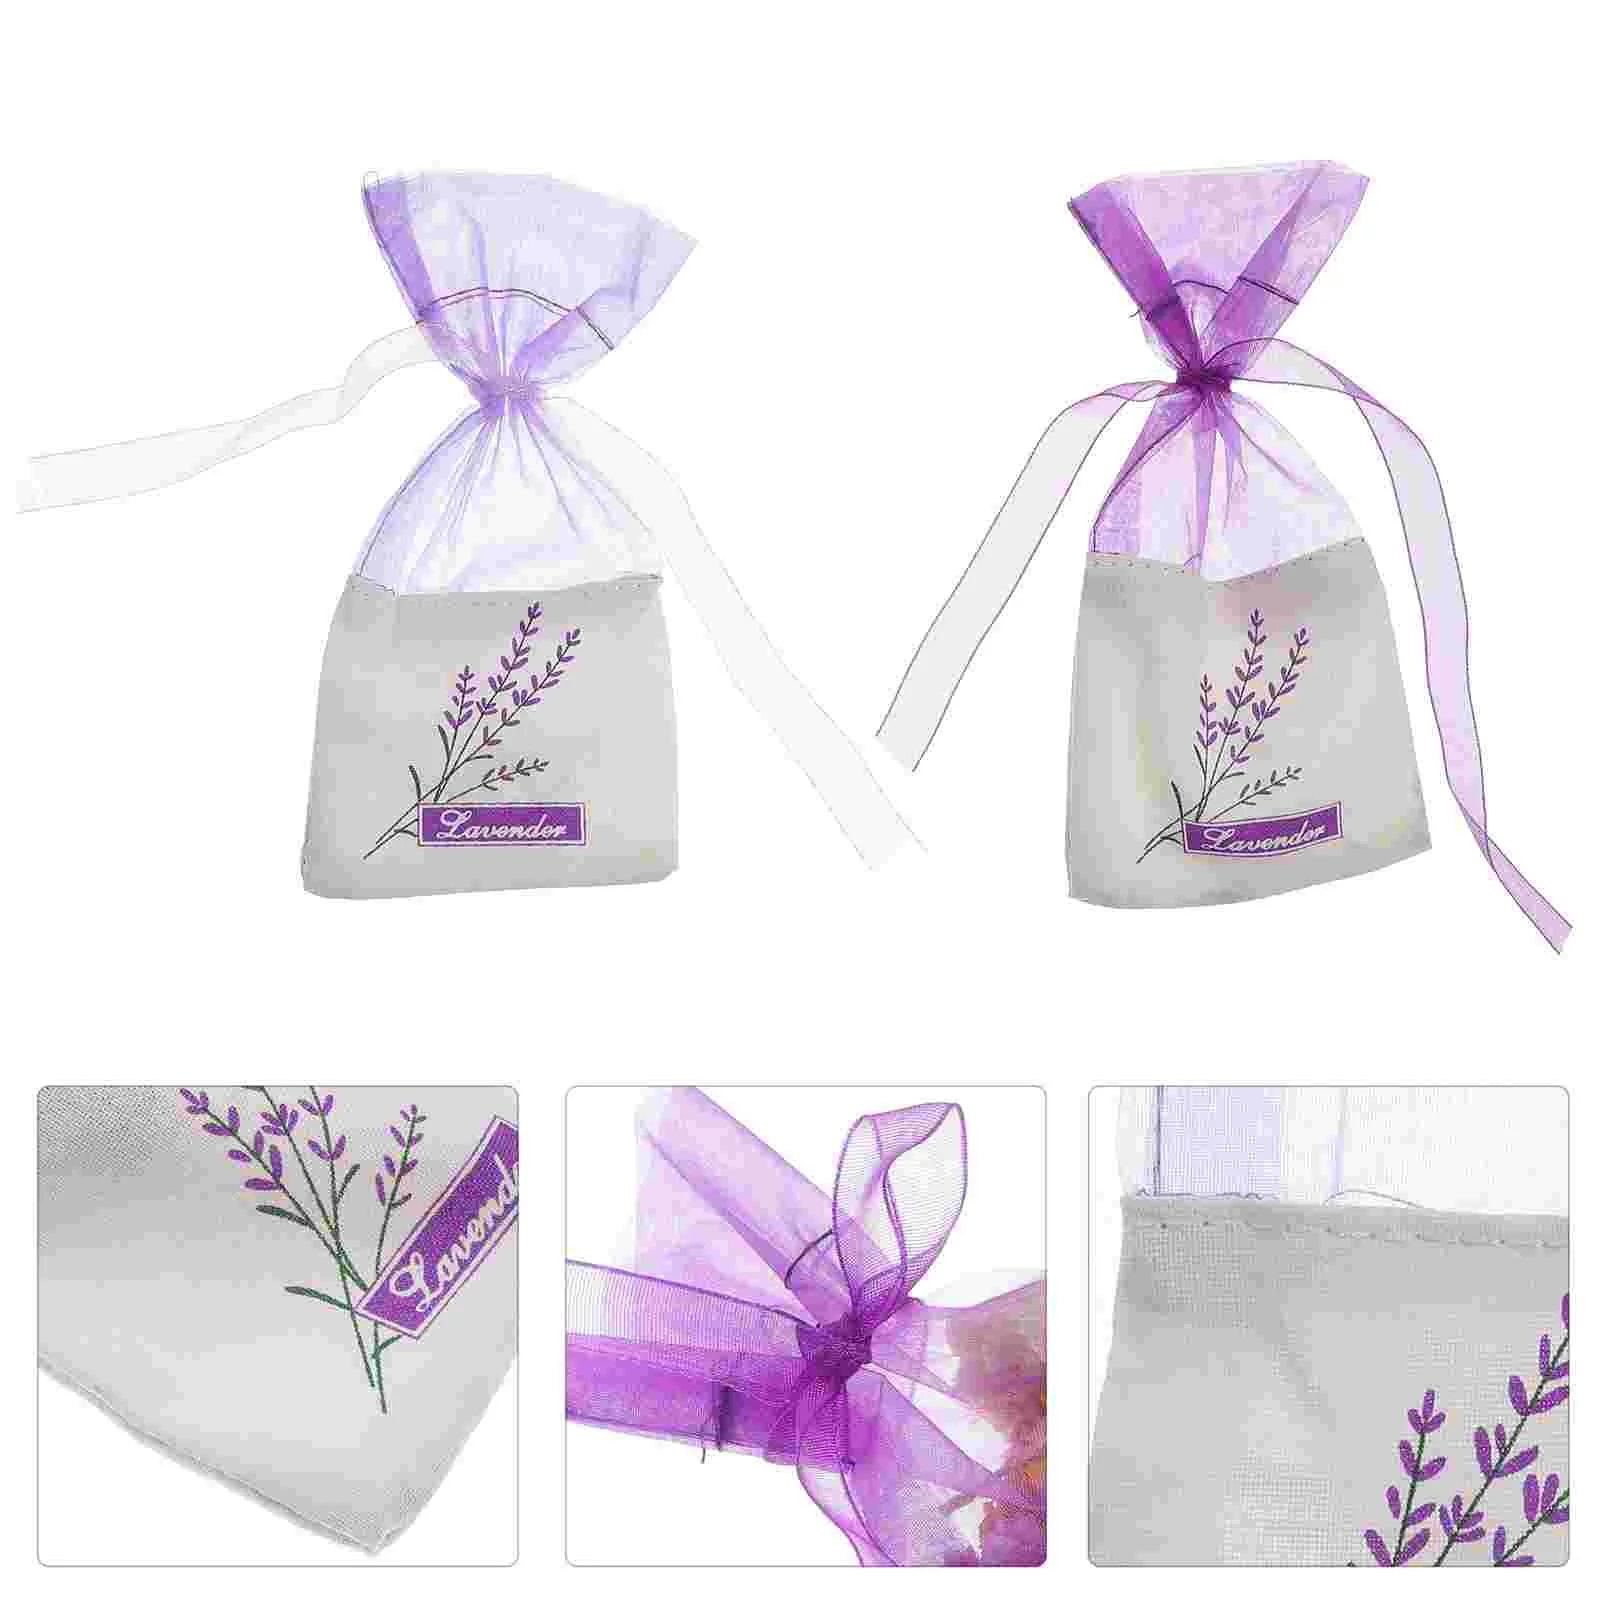 

Bags Lavender Sachet Sachets Emptyfragrance Scented Favor Wedding Gift Gauze Bag Organza Small Candy Drawers Bulk Dried